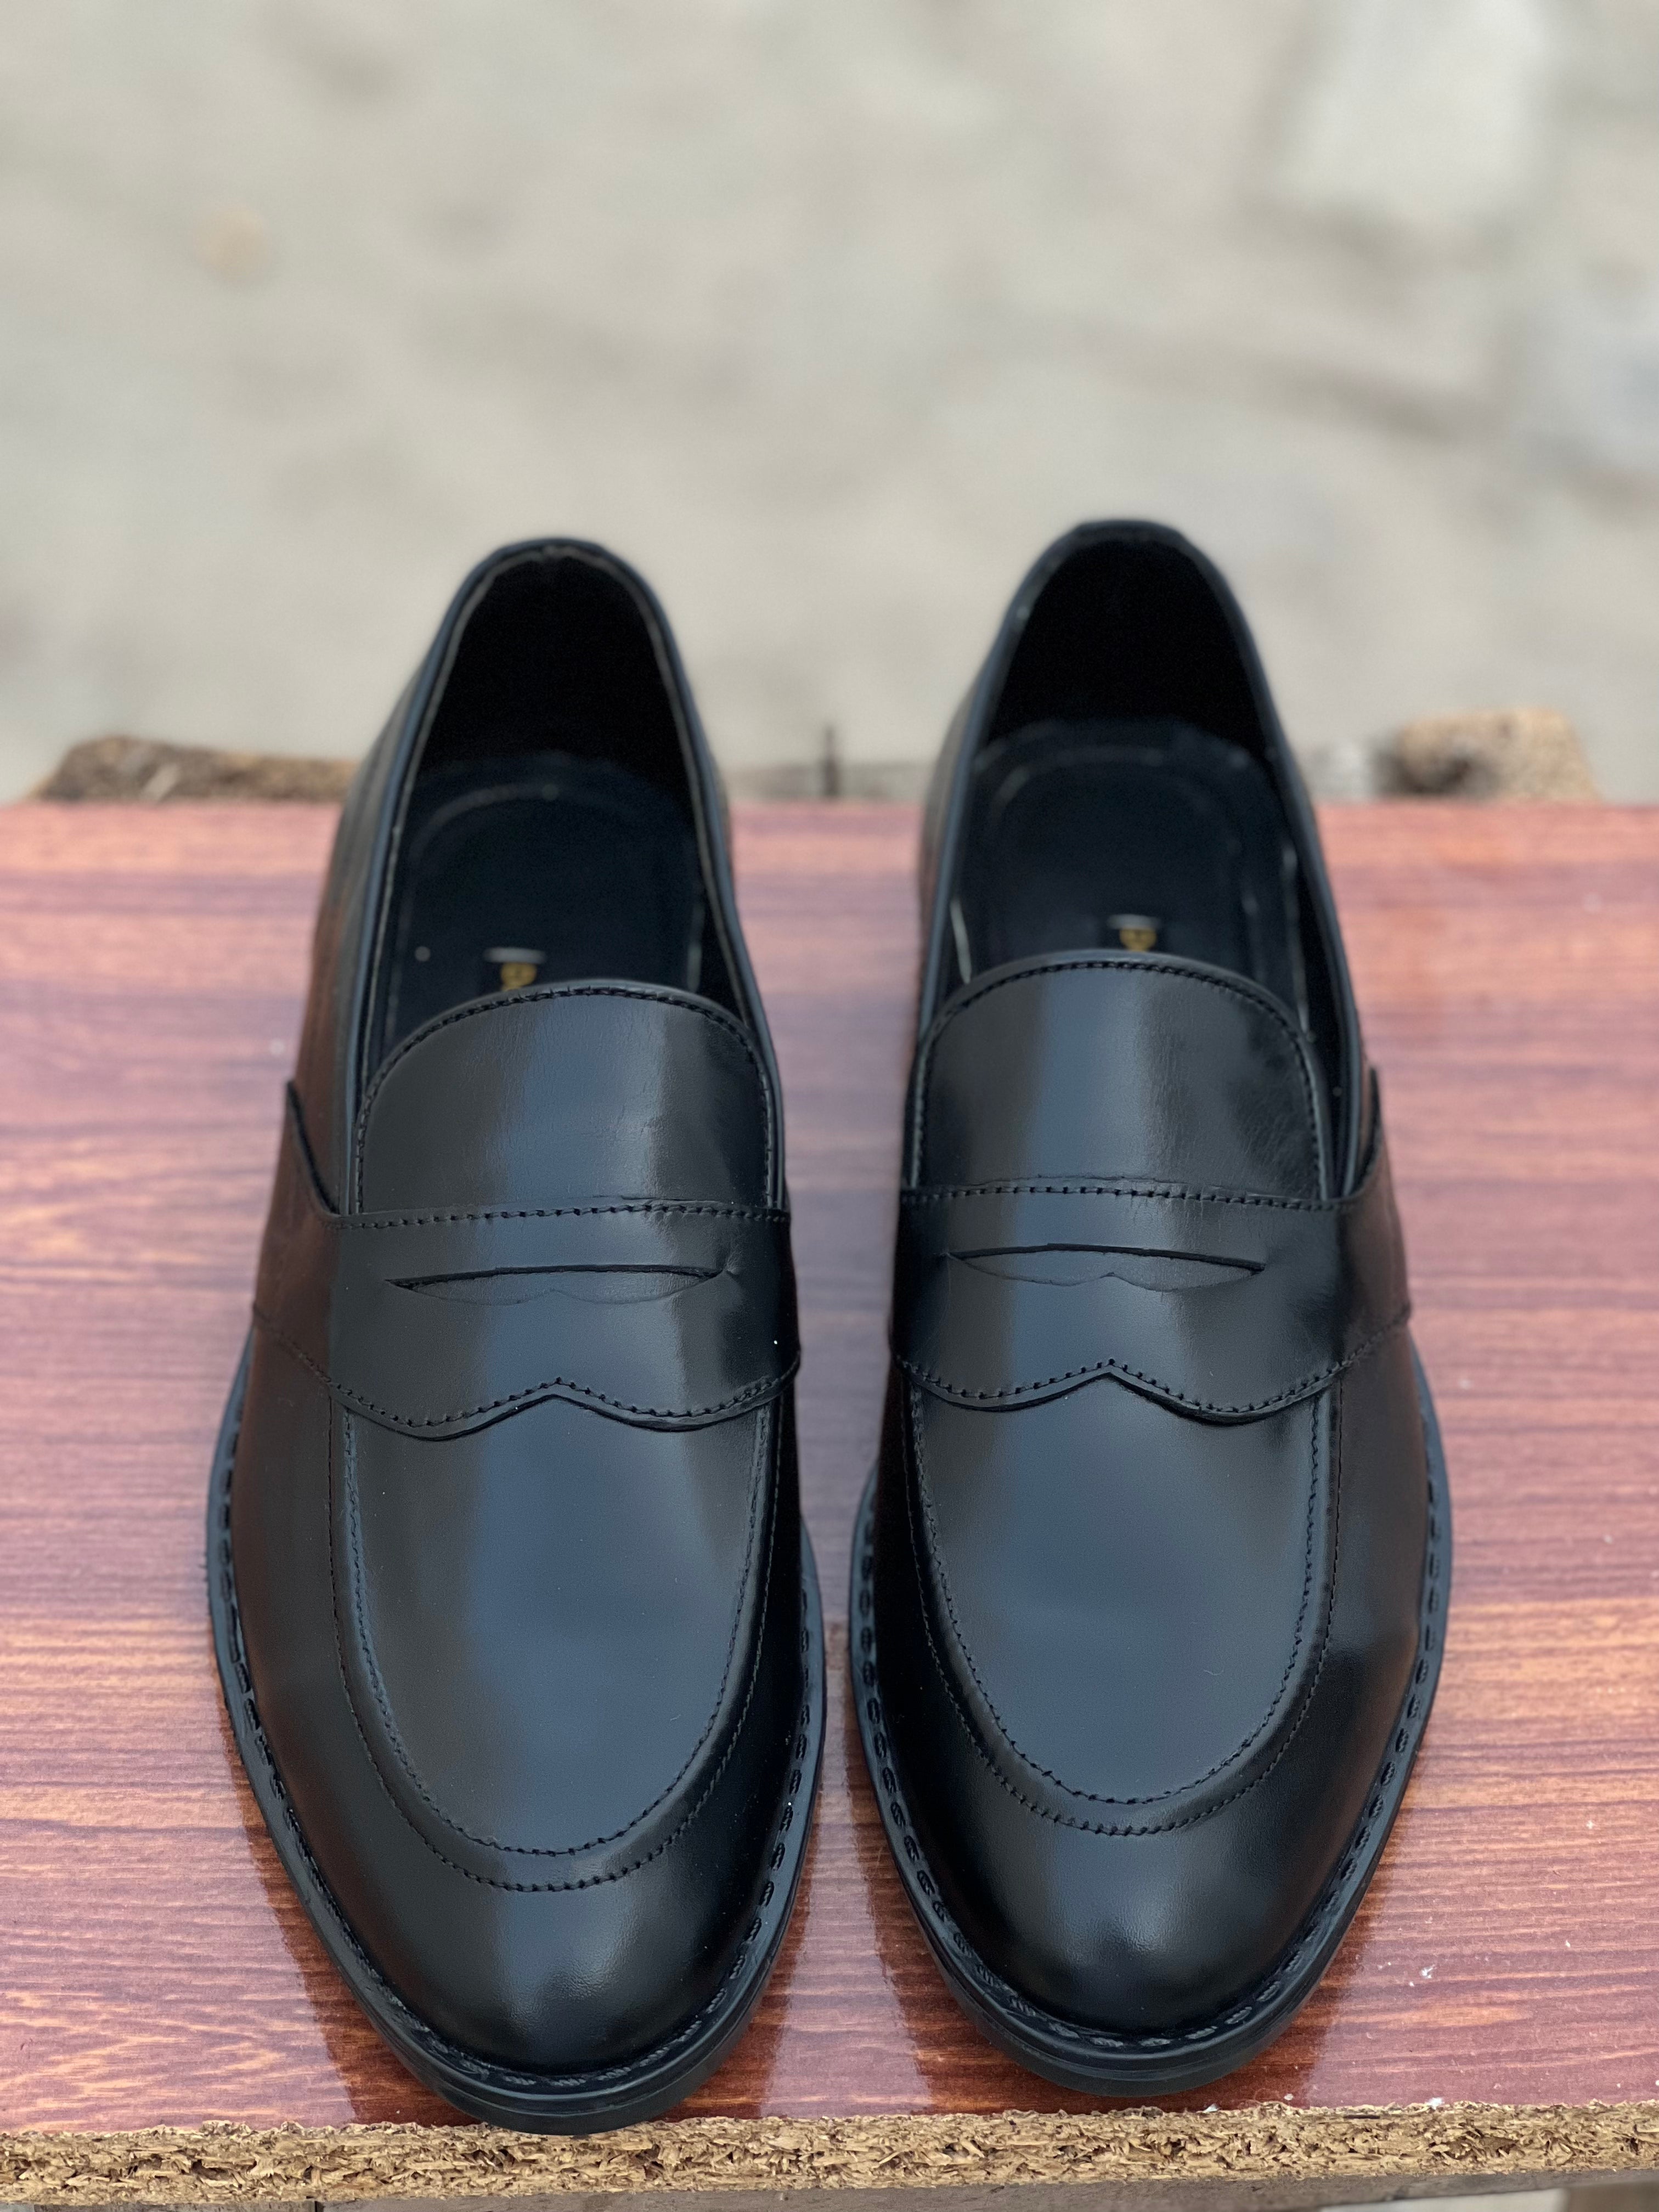 5004-Black Cow Leather Formal Loafer Style In Rubber sole – DeVogue